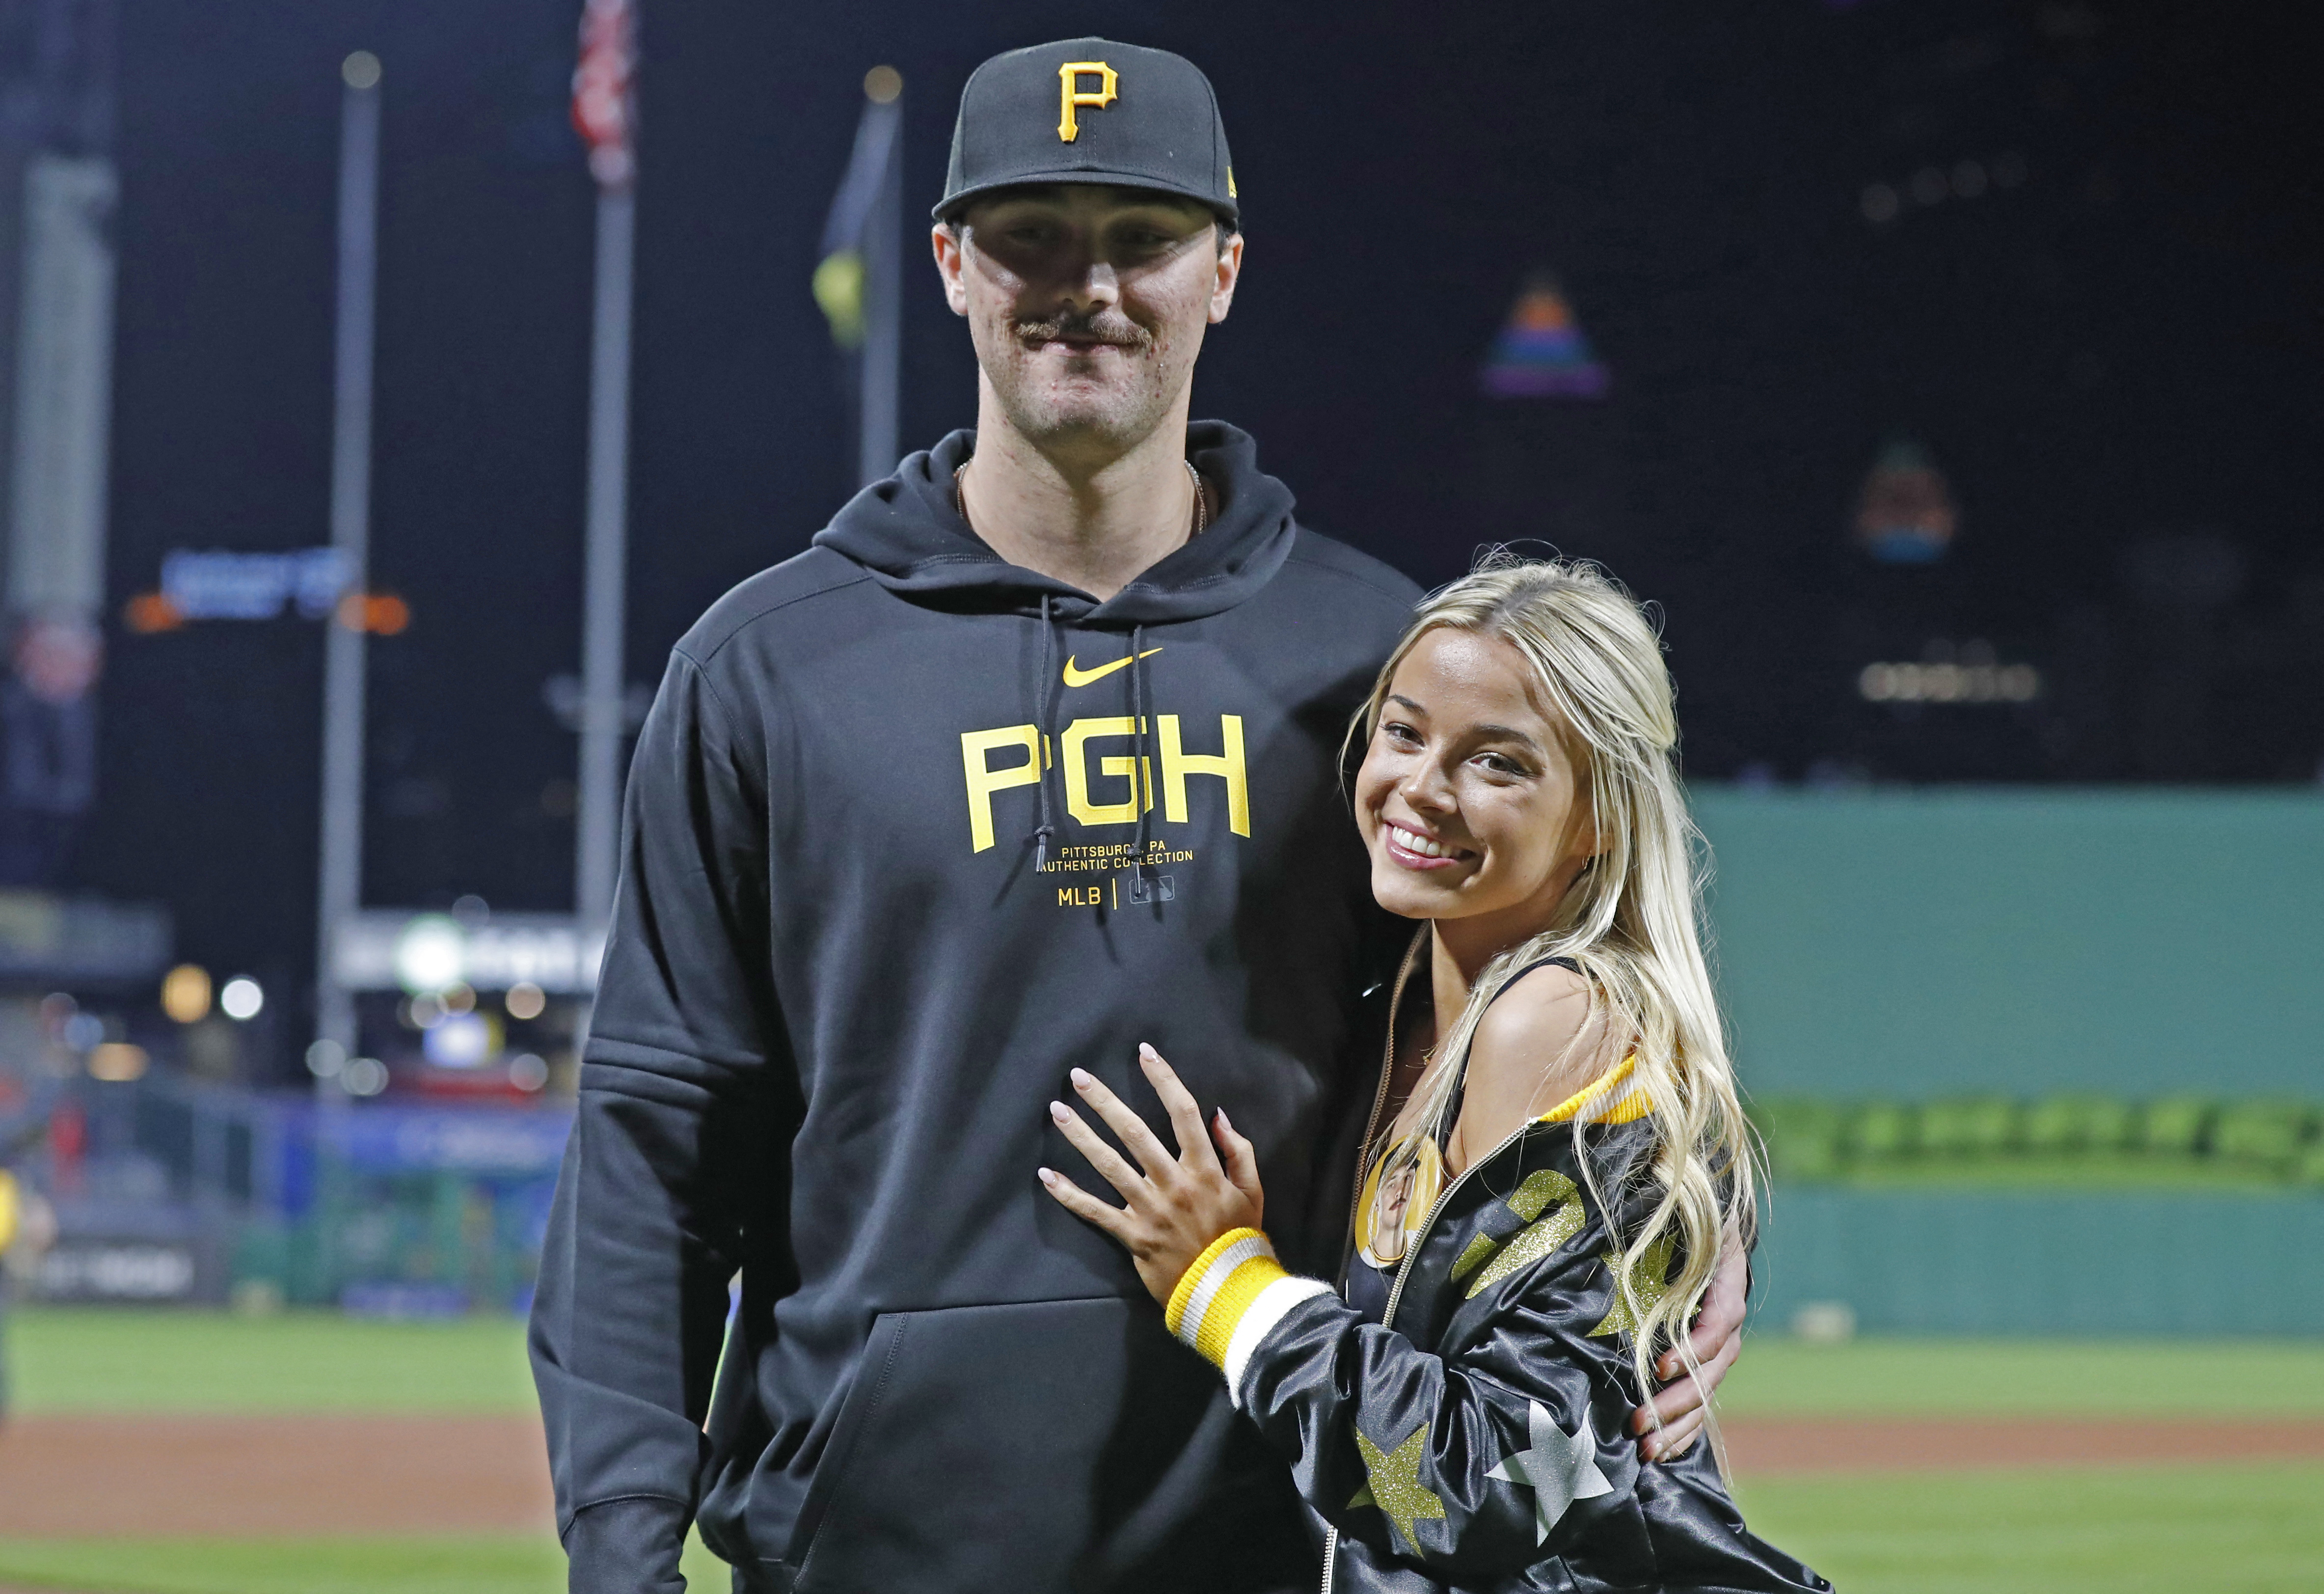 The social media influencer Dunne has been in a relationship with MLB rookie star Paul Skenes